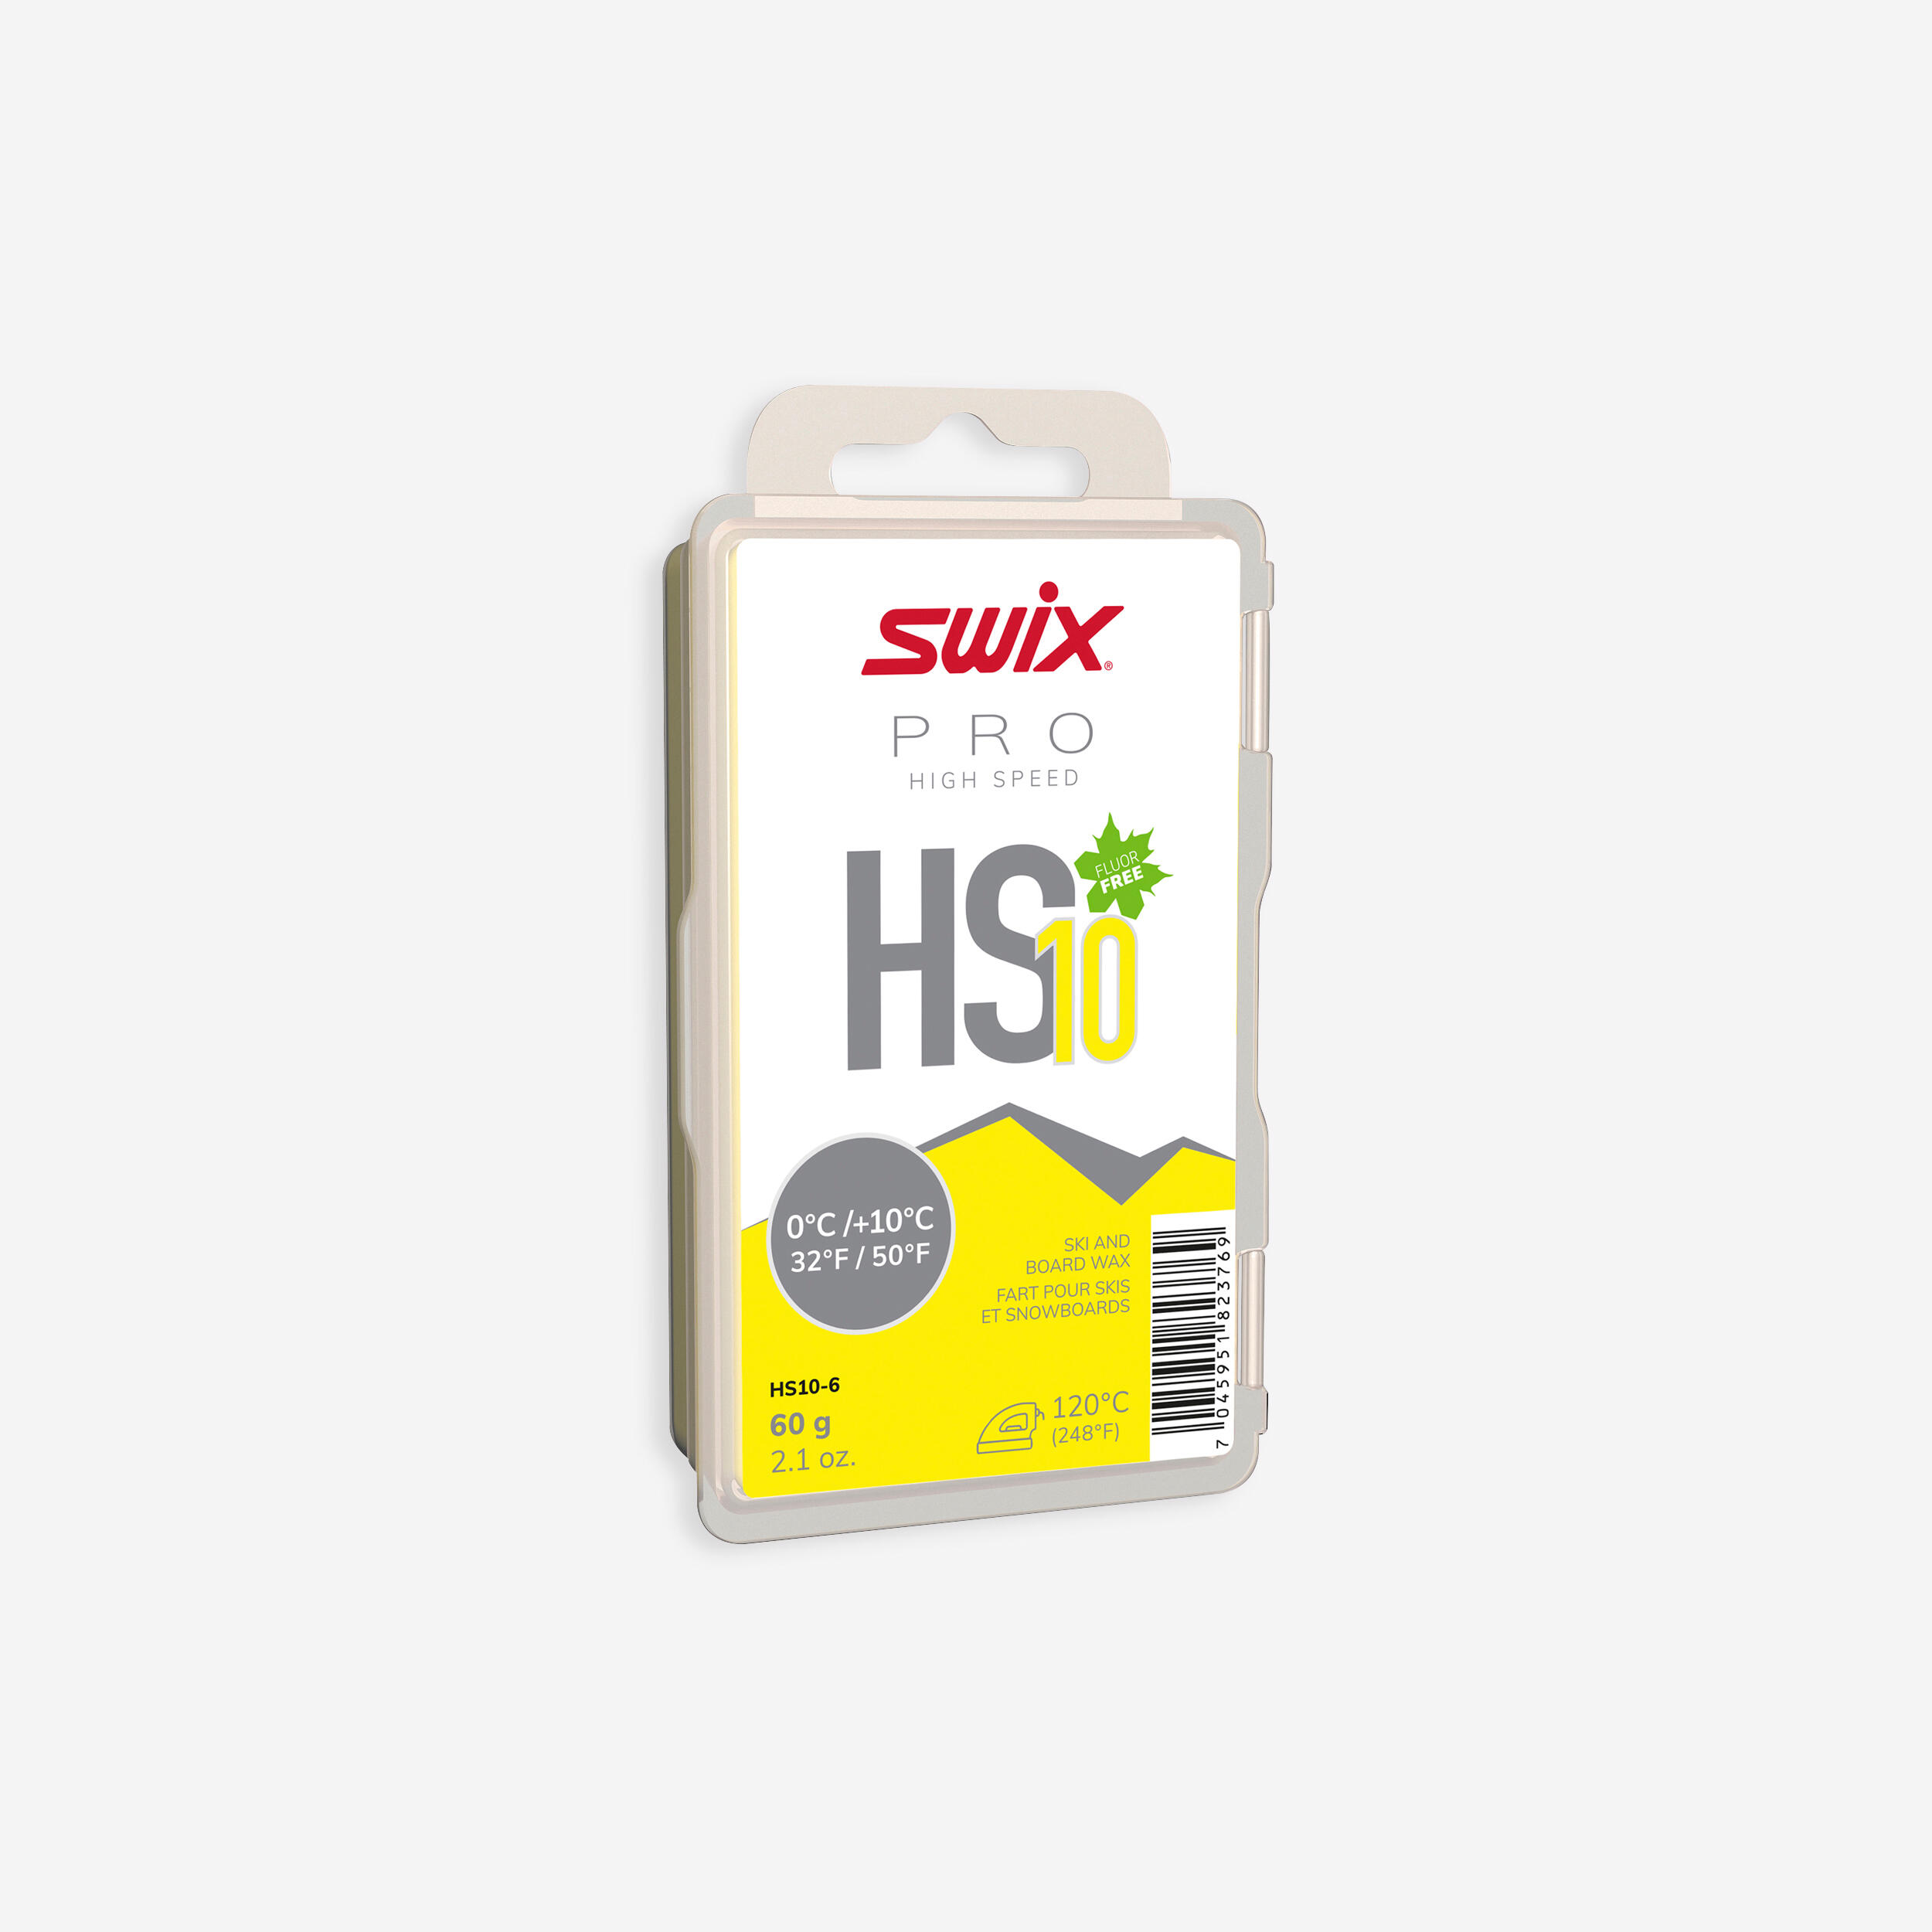 Photos - Other for Winter Sports Swix Warm Wax - Hs10 0°c/+10°c - 60g - Yellow 